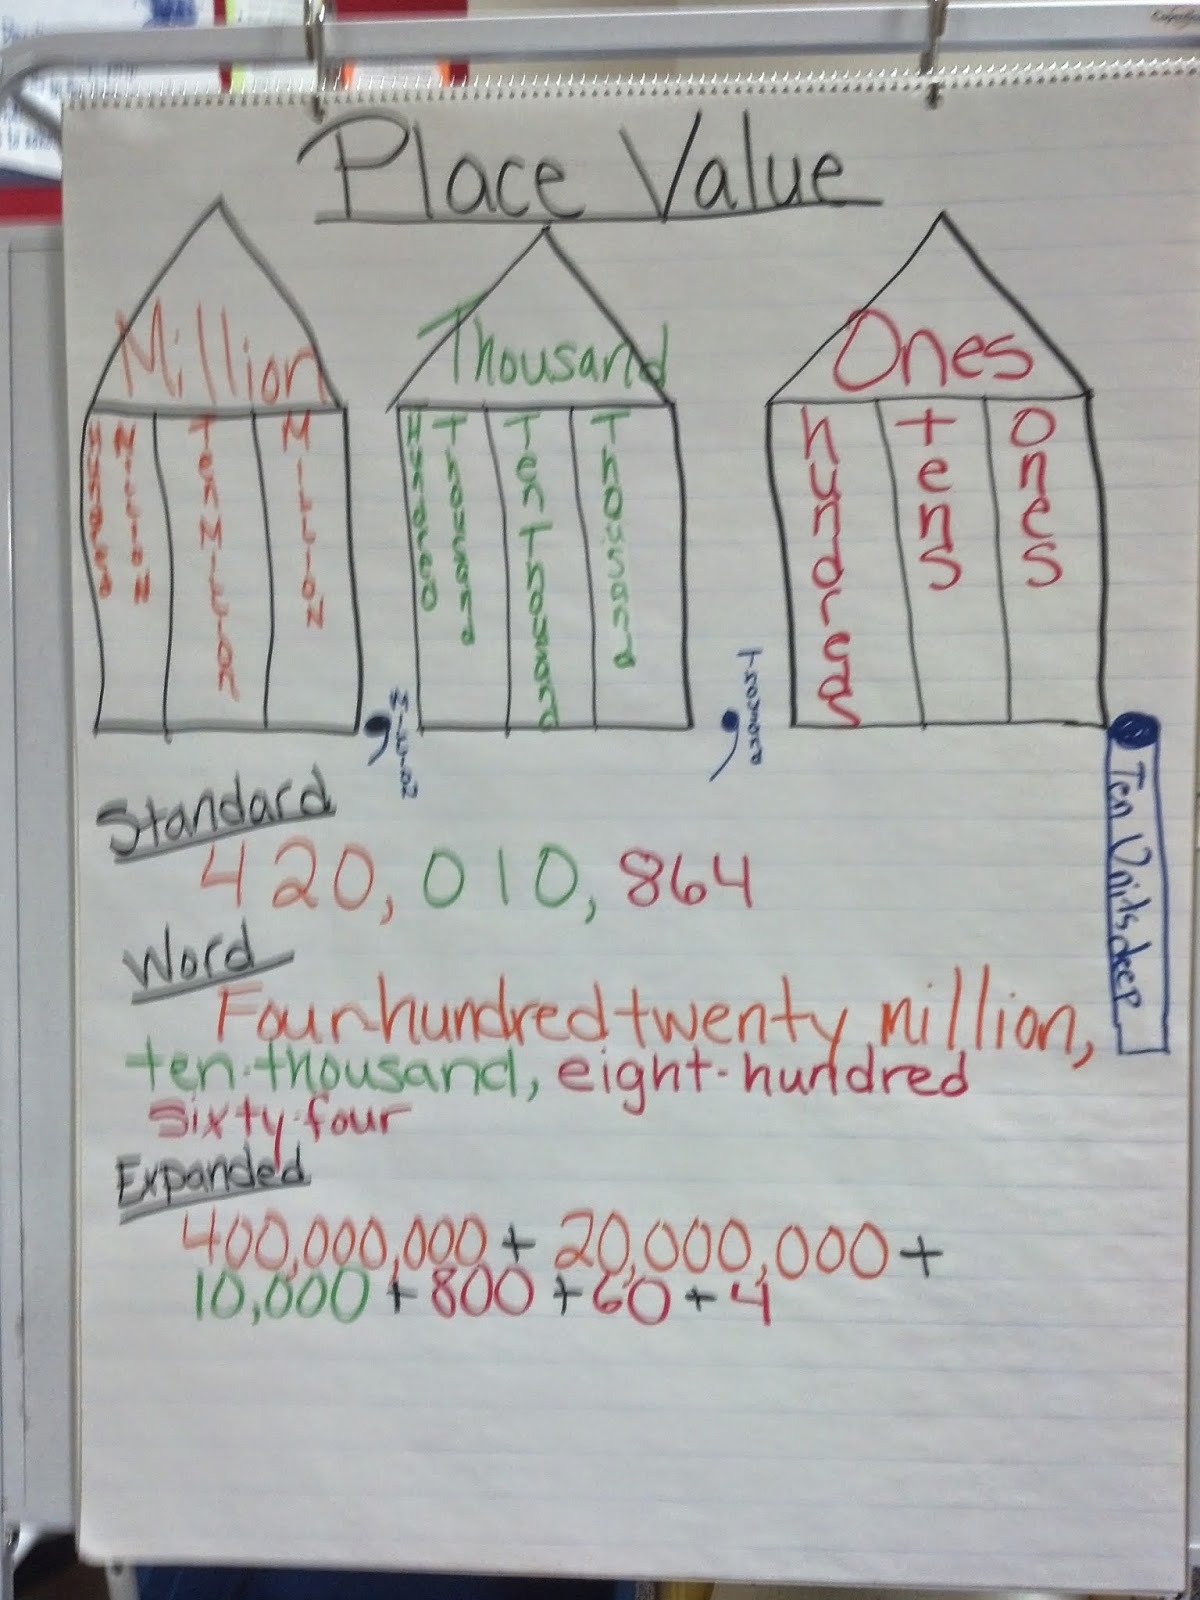 Parent & Student Information: Place Value to the Millions Period!